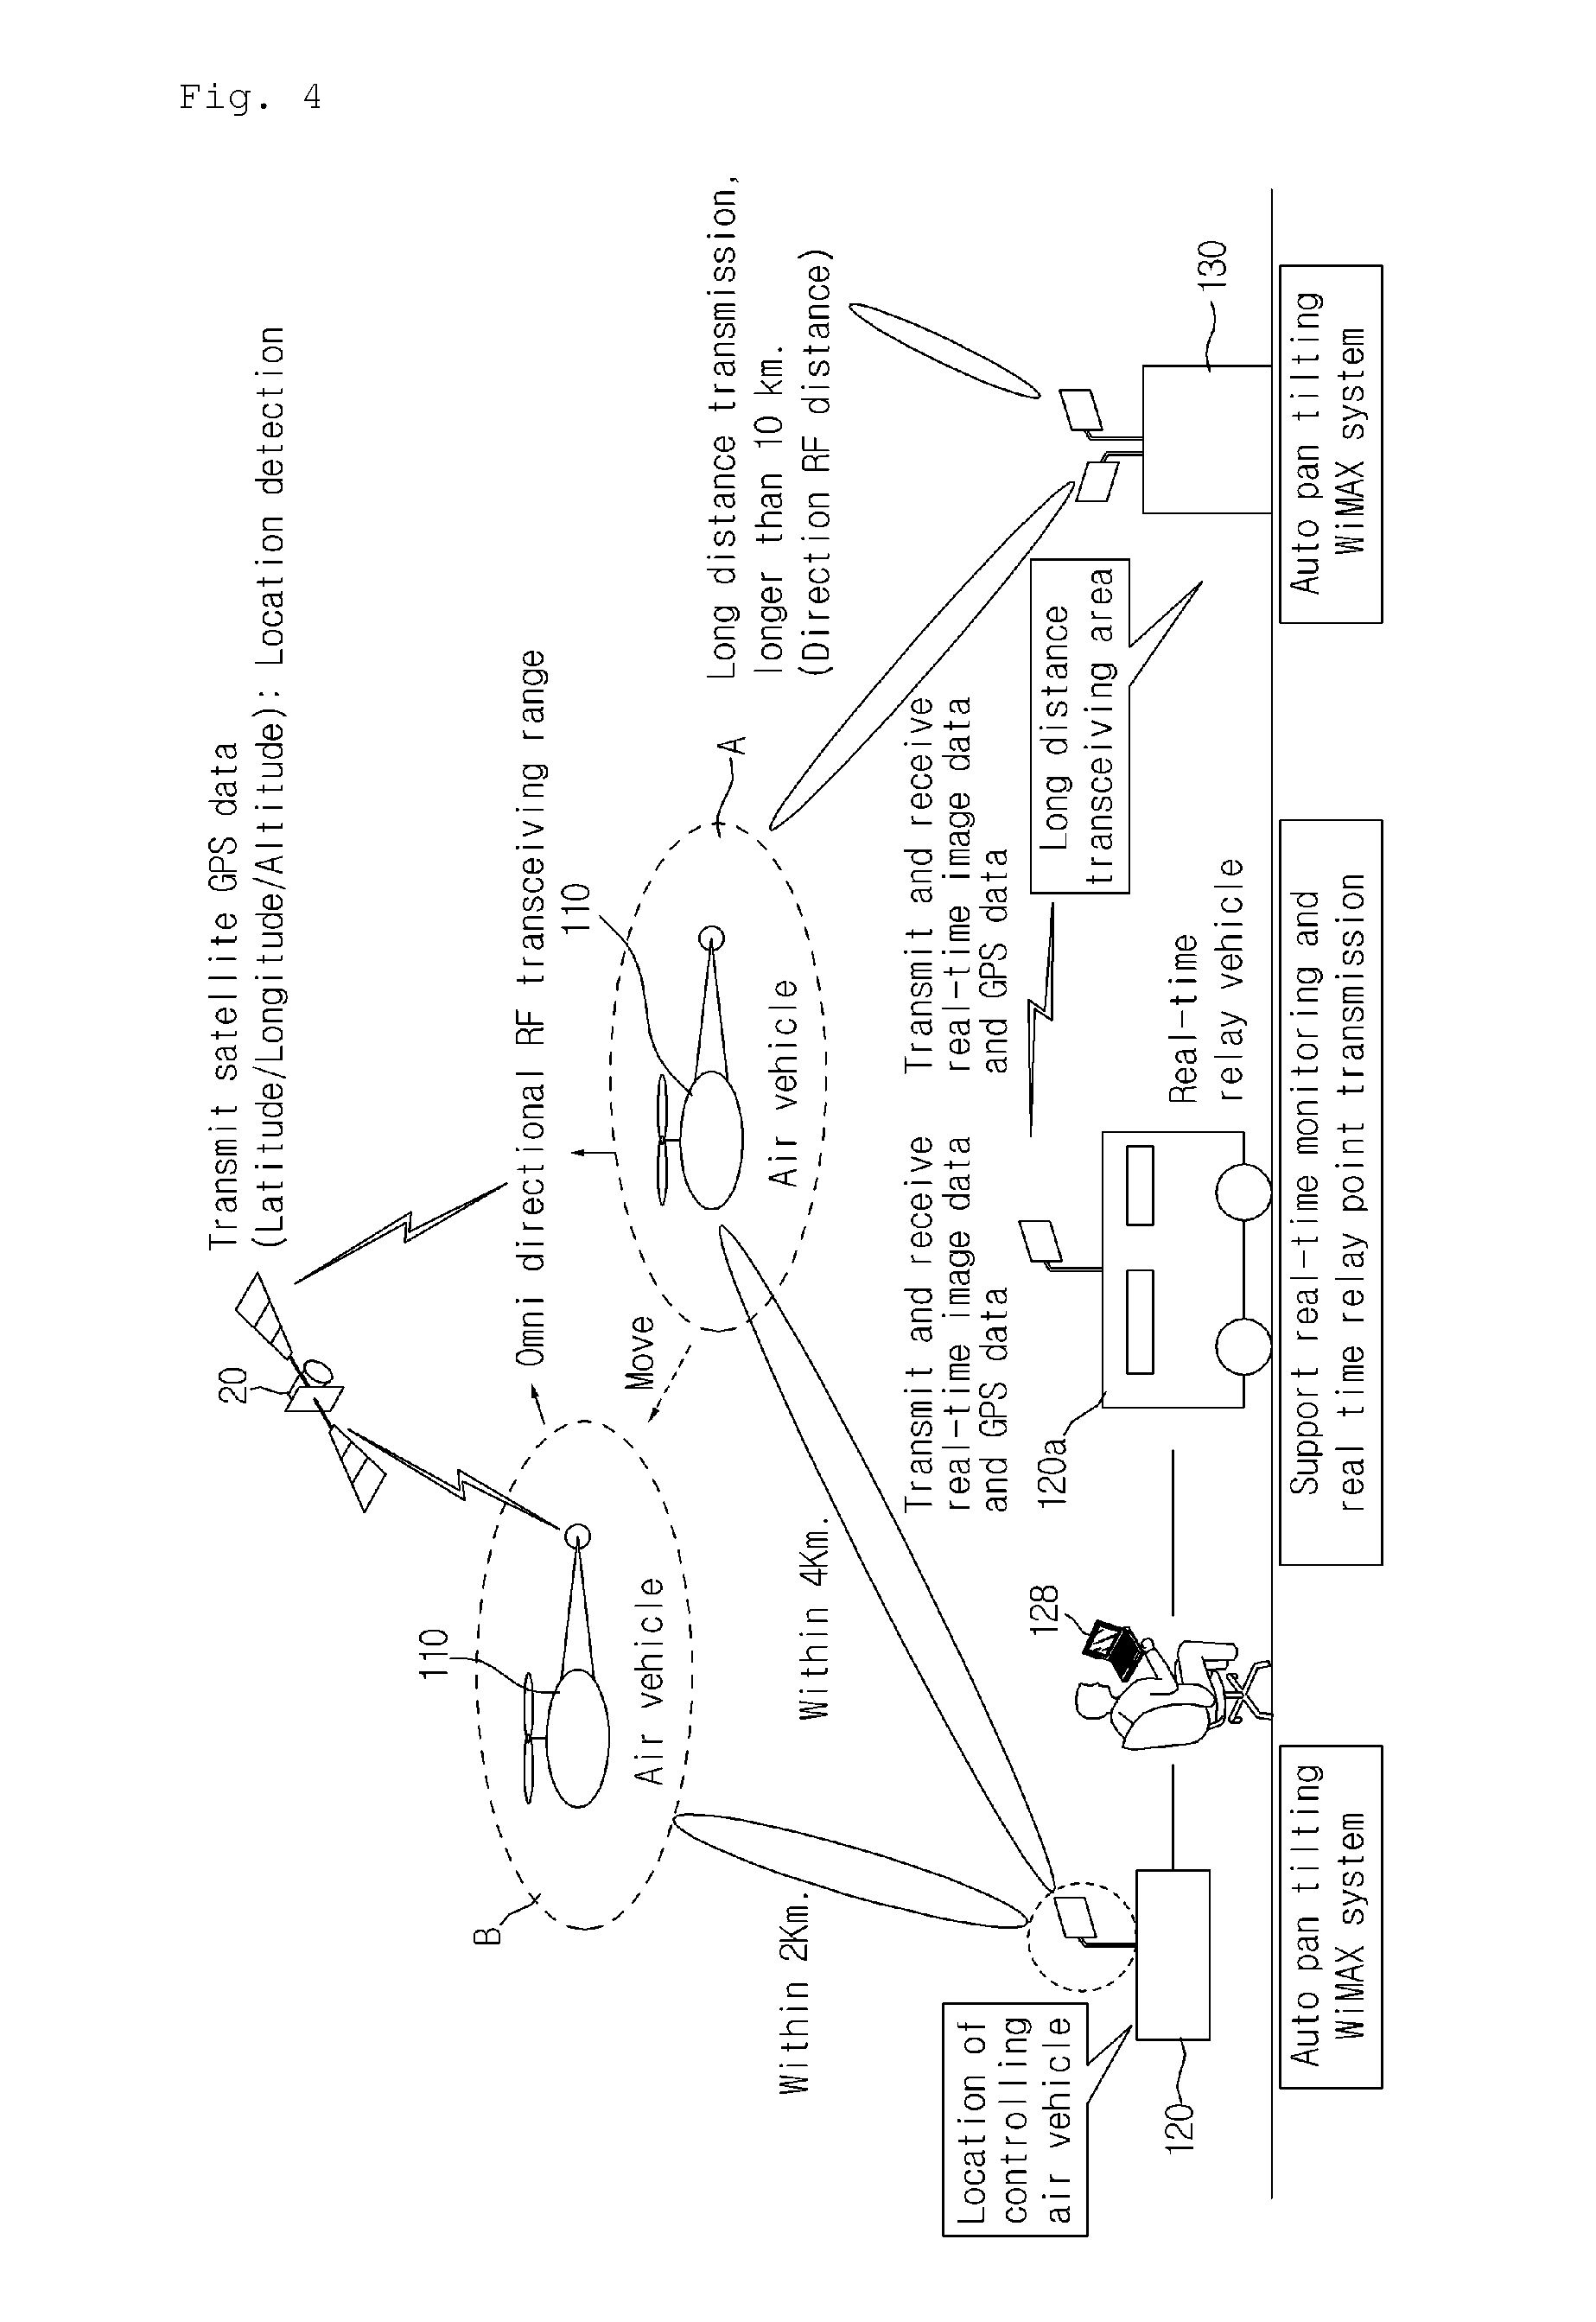 Monitoring system using unmanned air vehicle with wimax communication